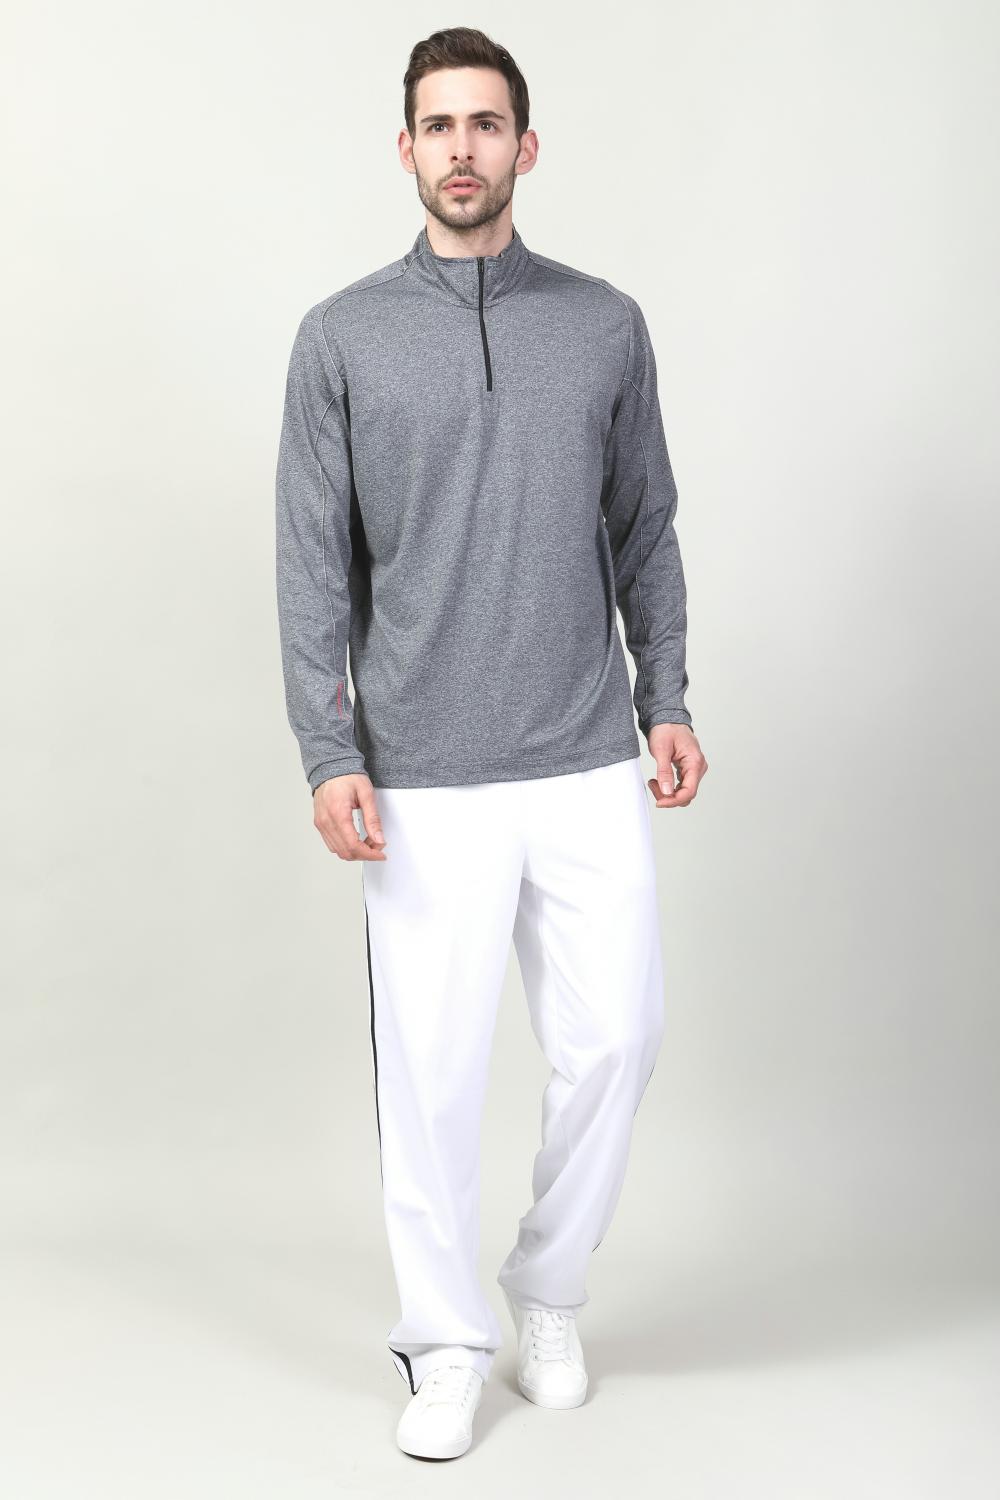 trackpants to match golfer top